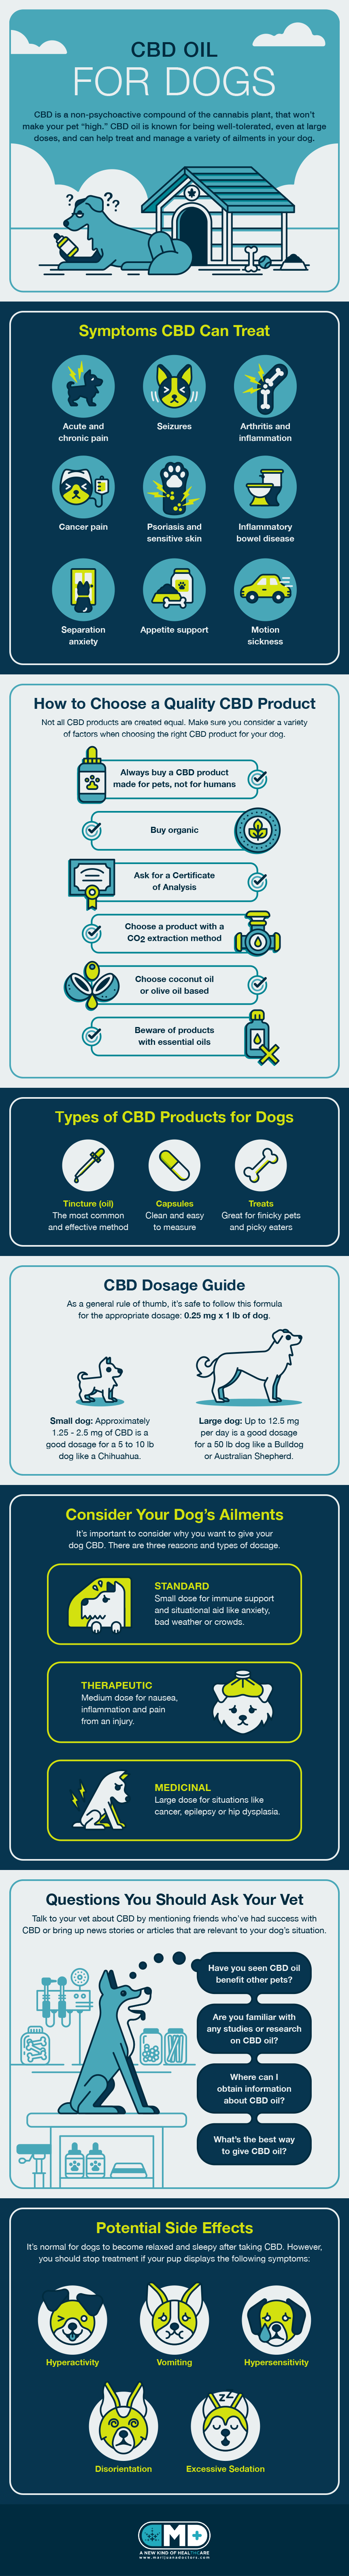 cbd oil for dogs infographic